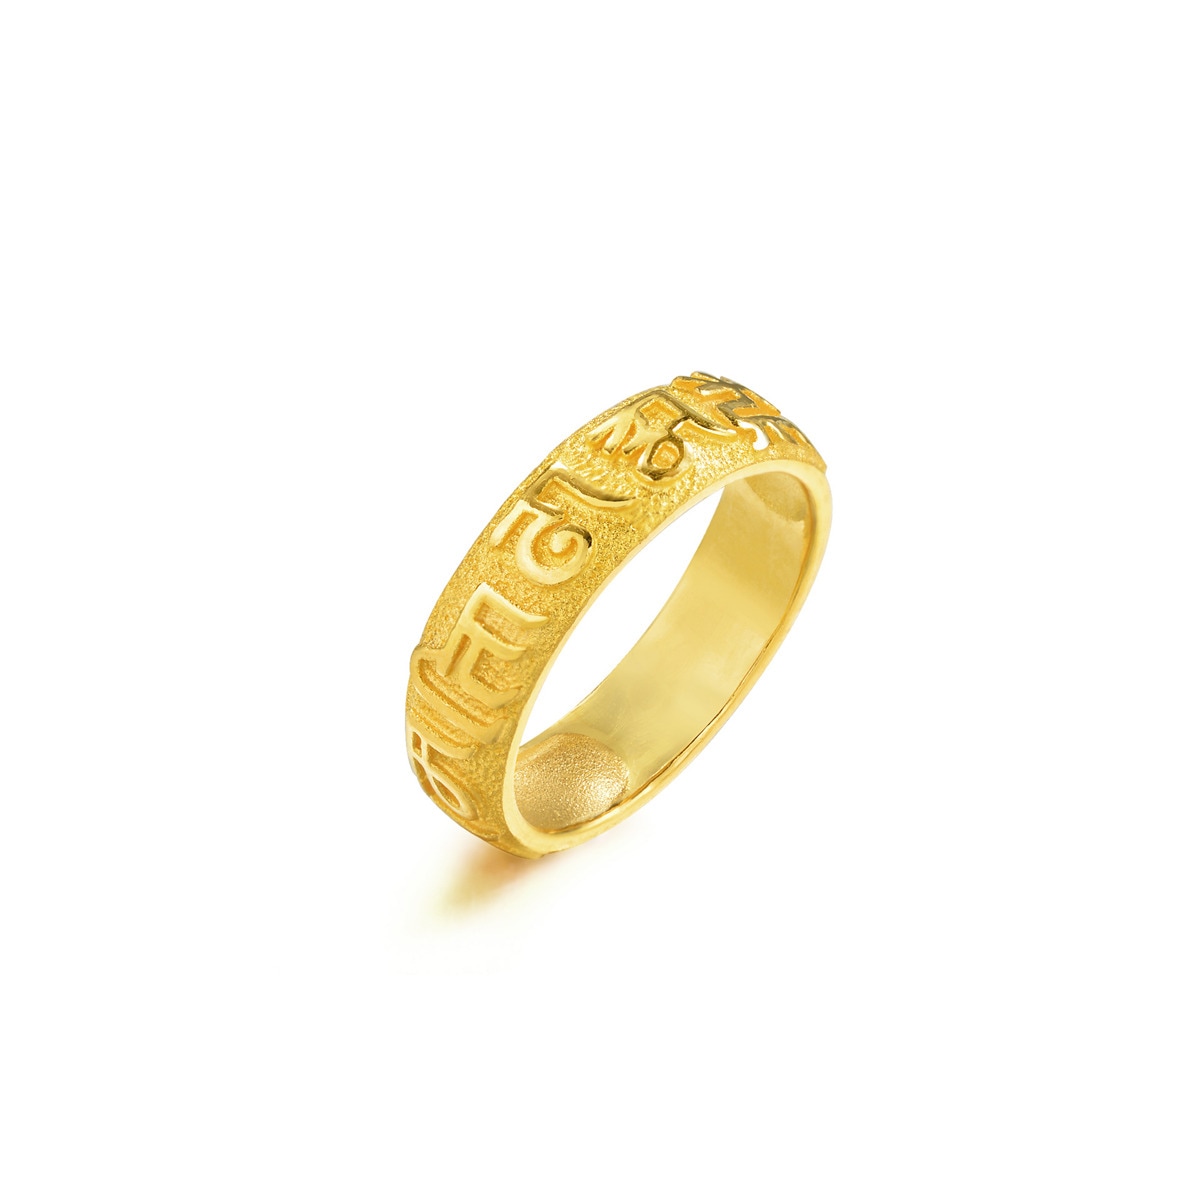 Cultural Blessings Ring - 86231R | Chow Sang Sang Jewellery